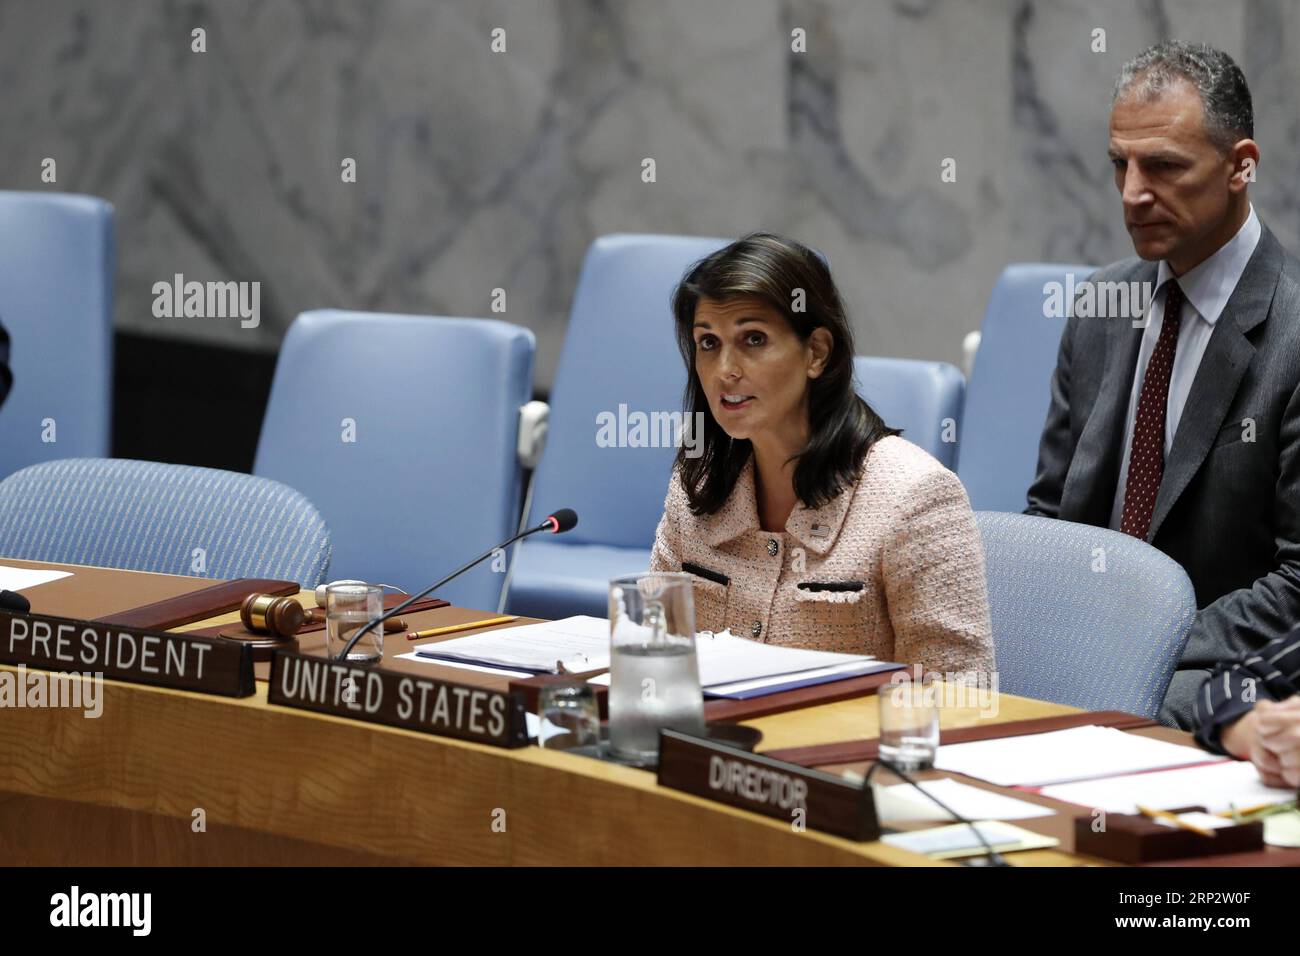 (180912) -- UNITED NATIONS, Sept. 12, 2018 -- U.S. ambassador to the United Nations (UN) Nikki Haley (L) speaks at a Security Council meeting on the situation in Syria s Idlib province at the UN headquarters in New York, on Sept. 11, 2018. As a seemingly imminent full-scale offensive on Syria s Idlib province looms, the UN Security Council on Tuesday remained deeply divided, prompting a no-escalation plea from Secretary-General Antonio Guterres. ) (yy) UN-SECURITY COUNCIL-SYRIA LixMuzi PUBLICATIONxNOTxINxCHN Stock Photo